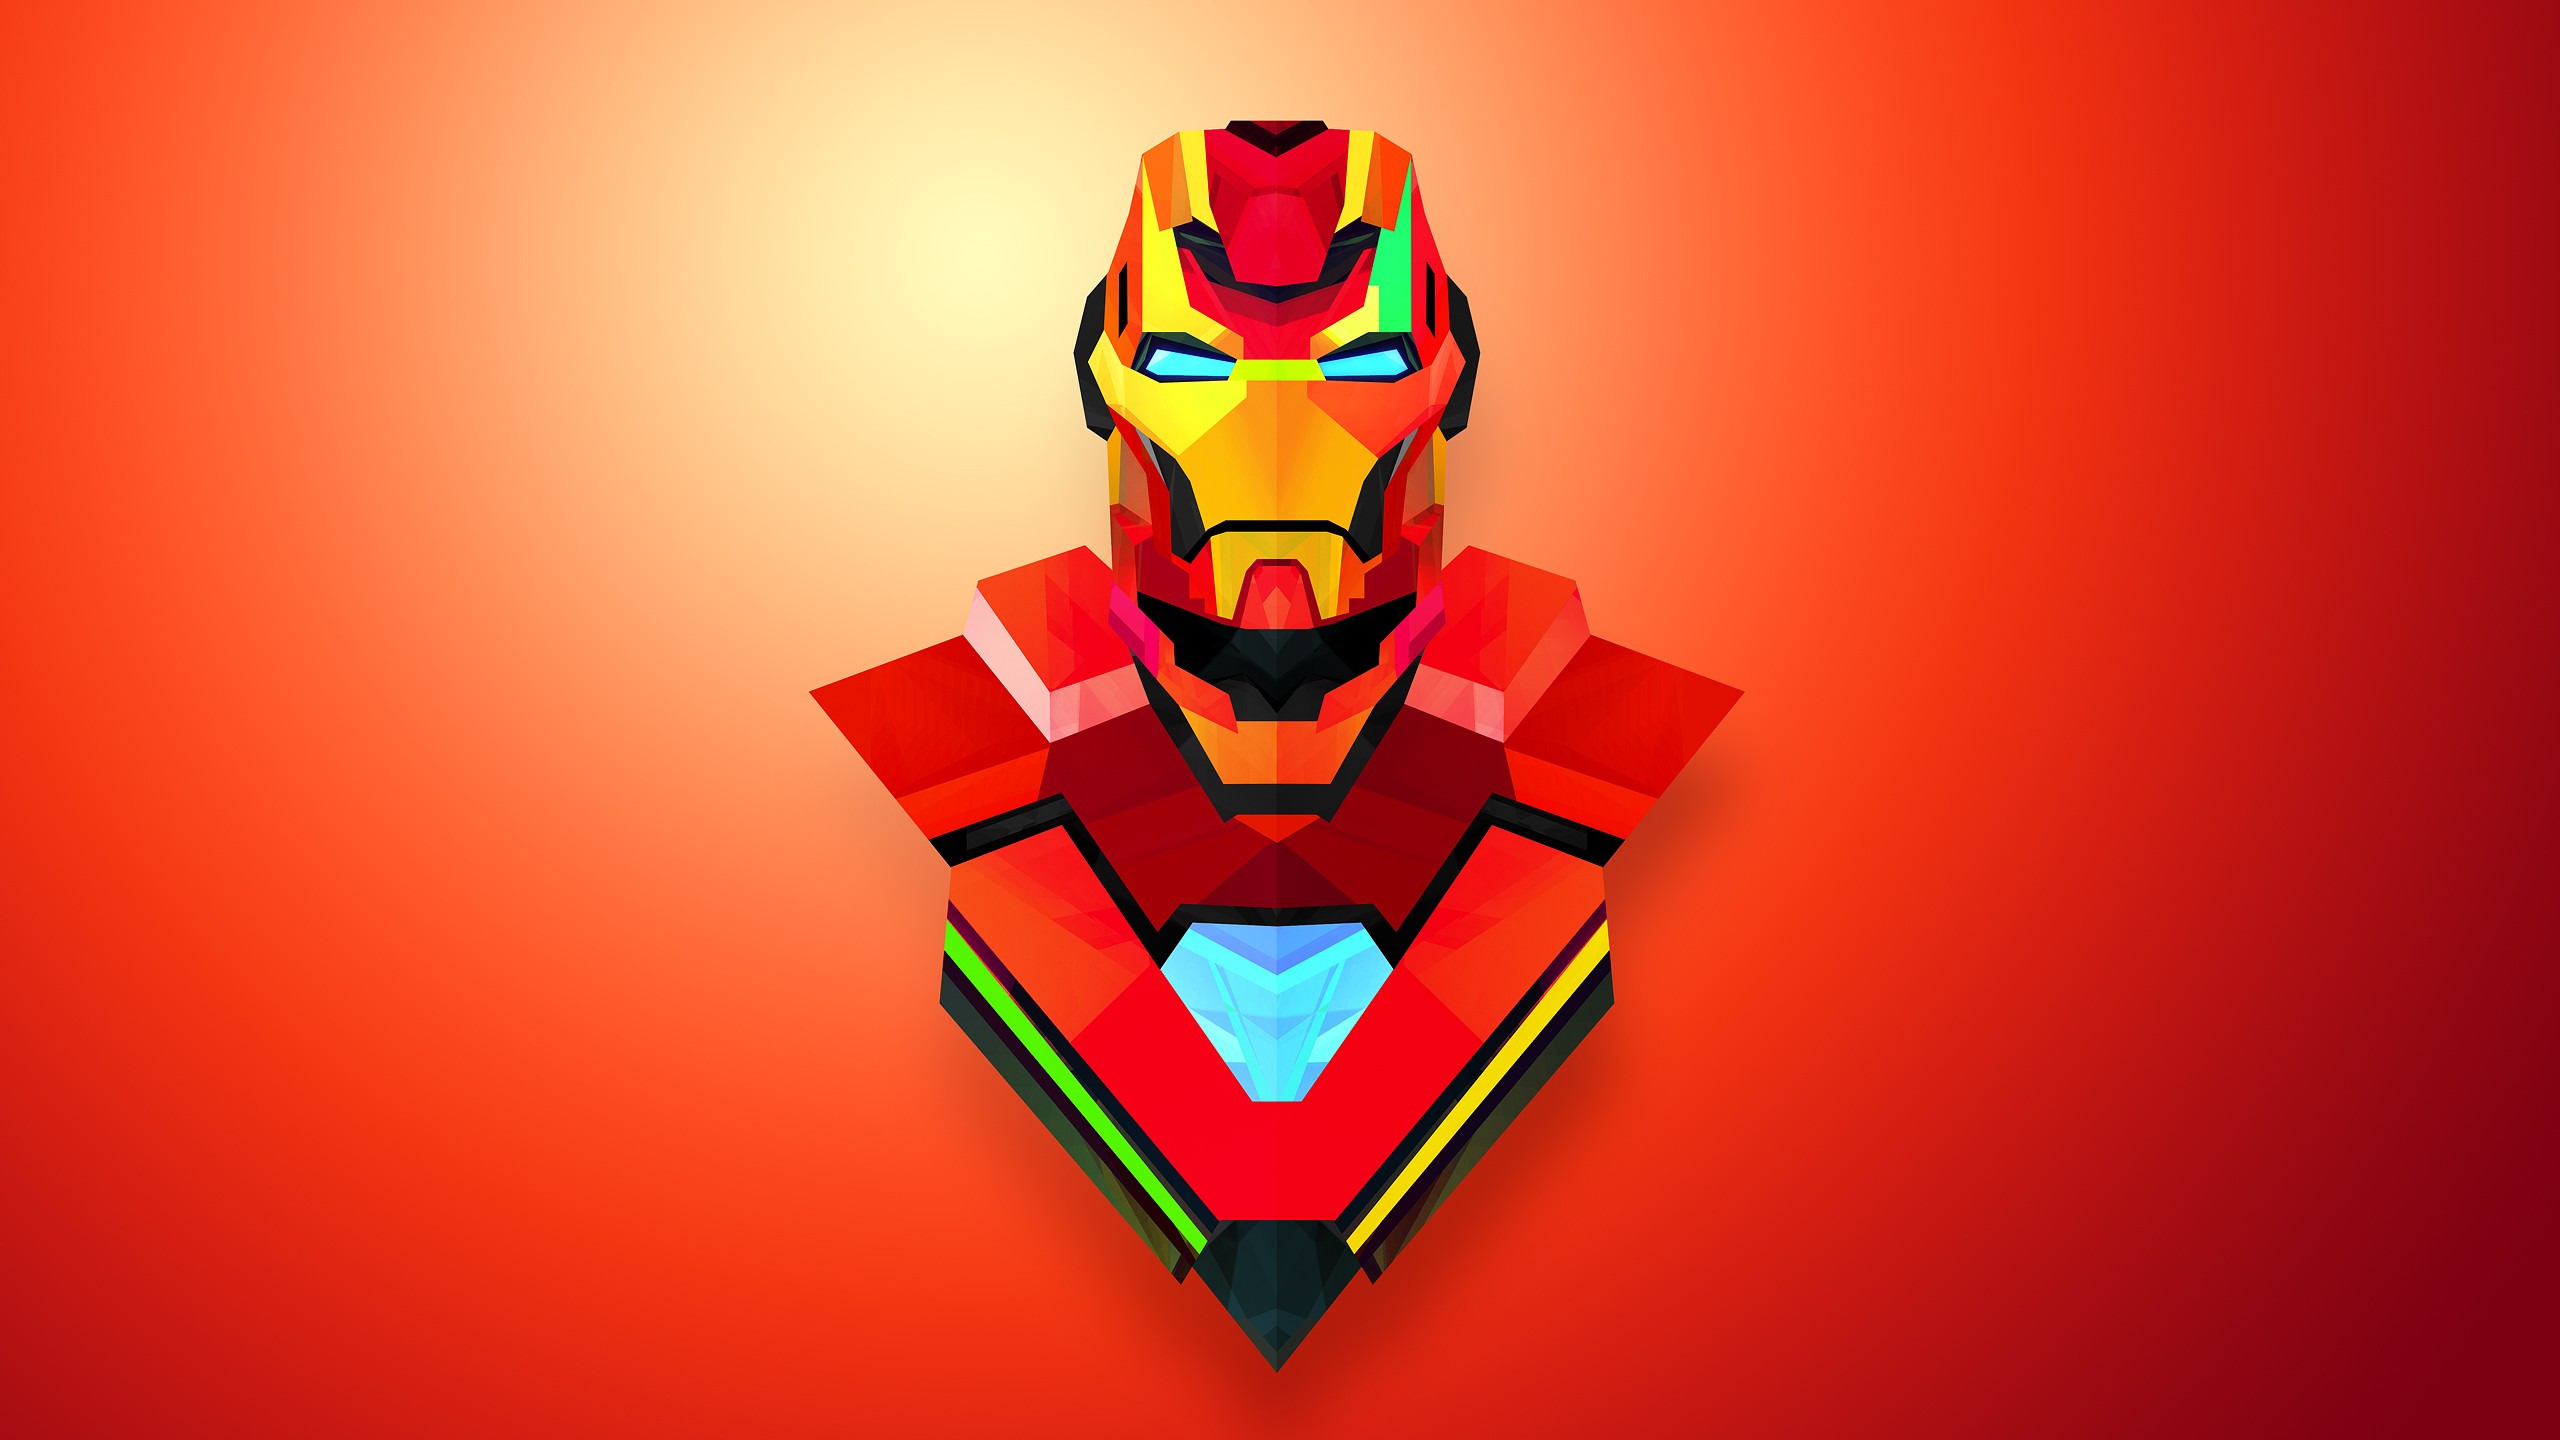 Abstract Justin Maller Iron Man Red Gradient 2560x1440